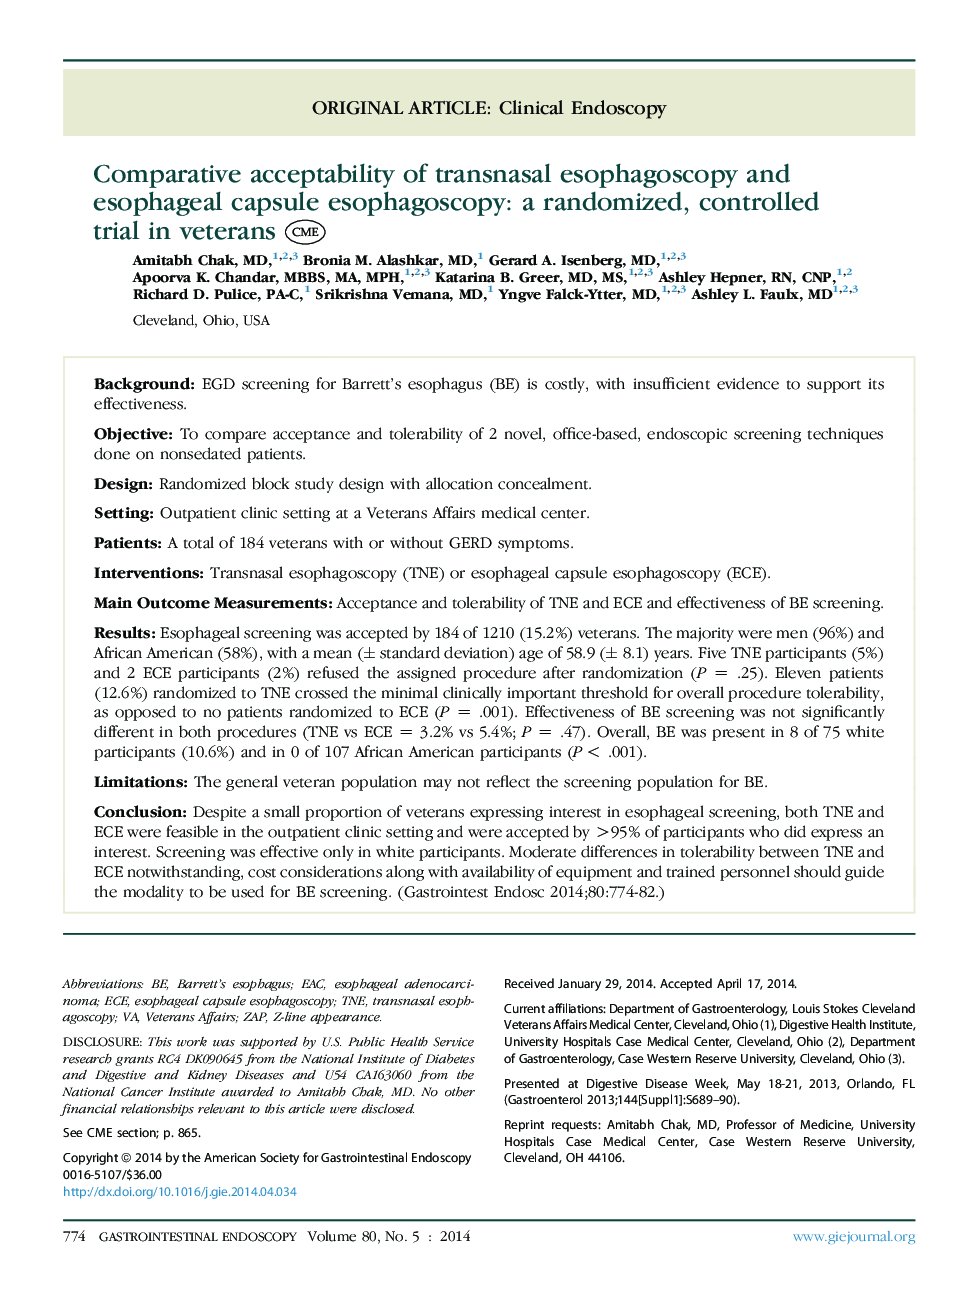 Comparative acceptability of transnasal esophagoscopy and esophageal capsule esophagoscopy: a randomized, controlled trial in veterans 